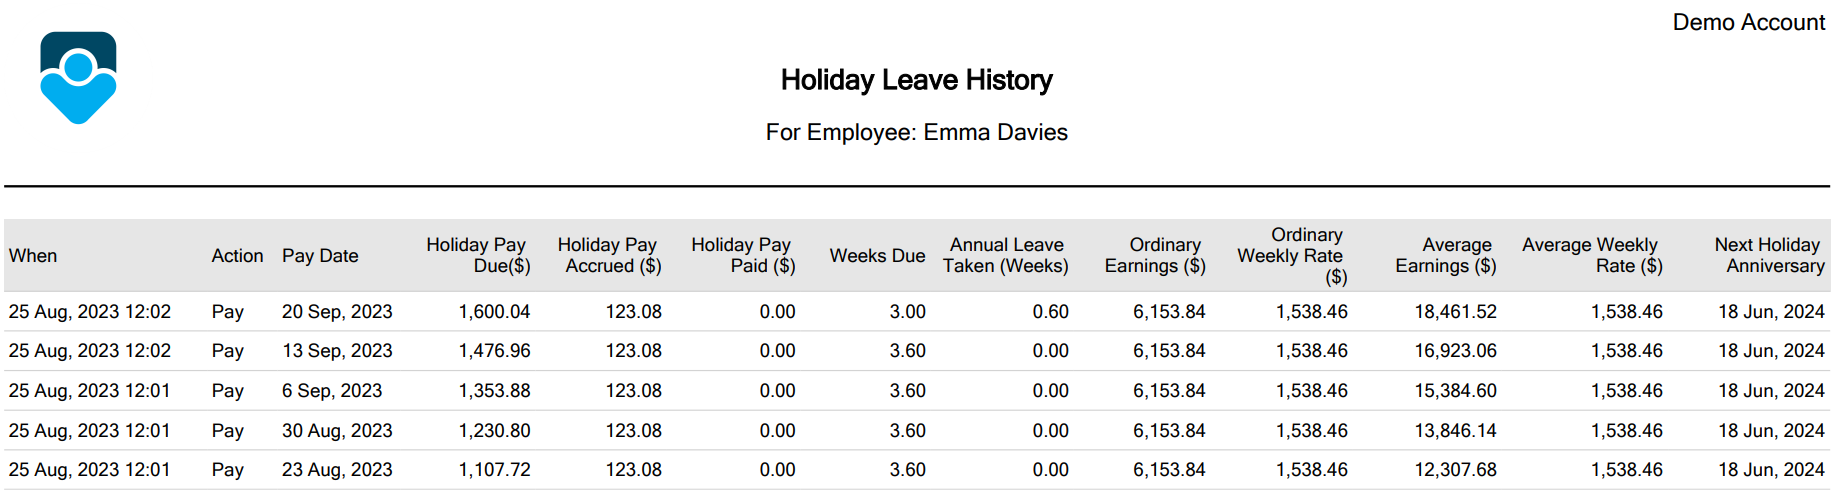 Holiday Leave History Report.png